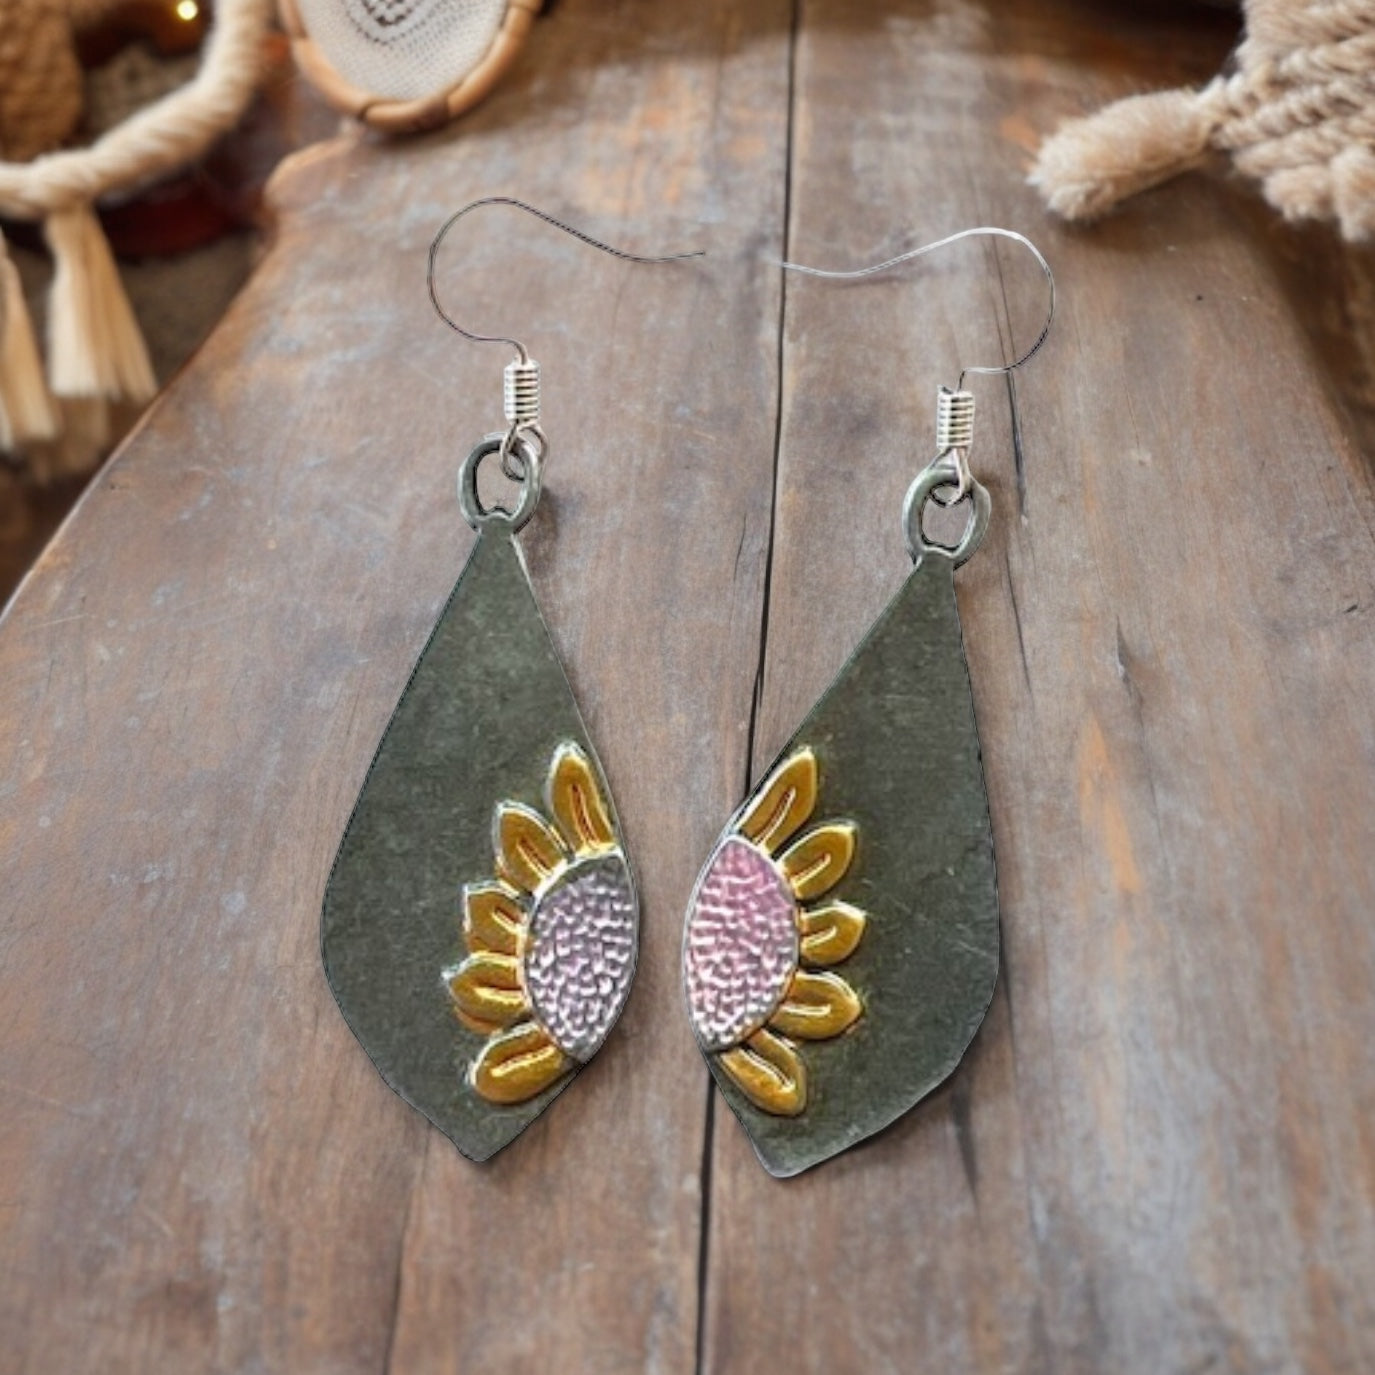 Teardrop Silver Earrings with Sunflowers: Nature-Inspired Accessories